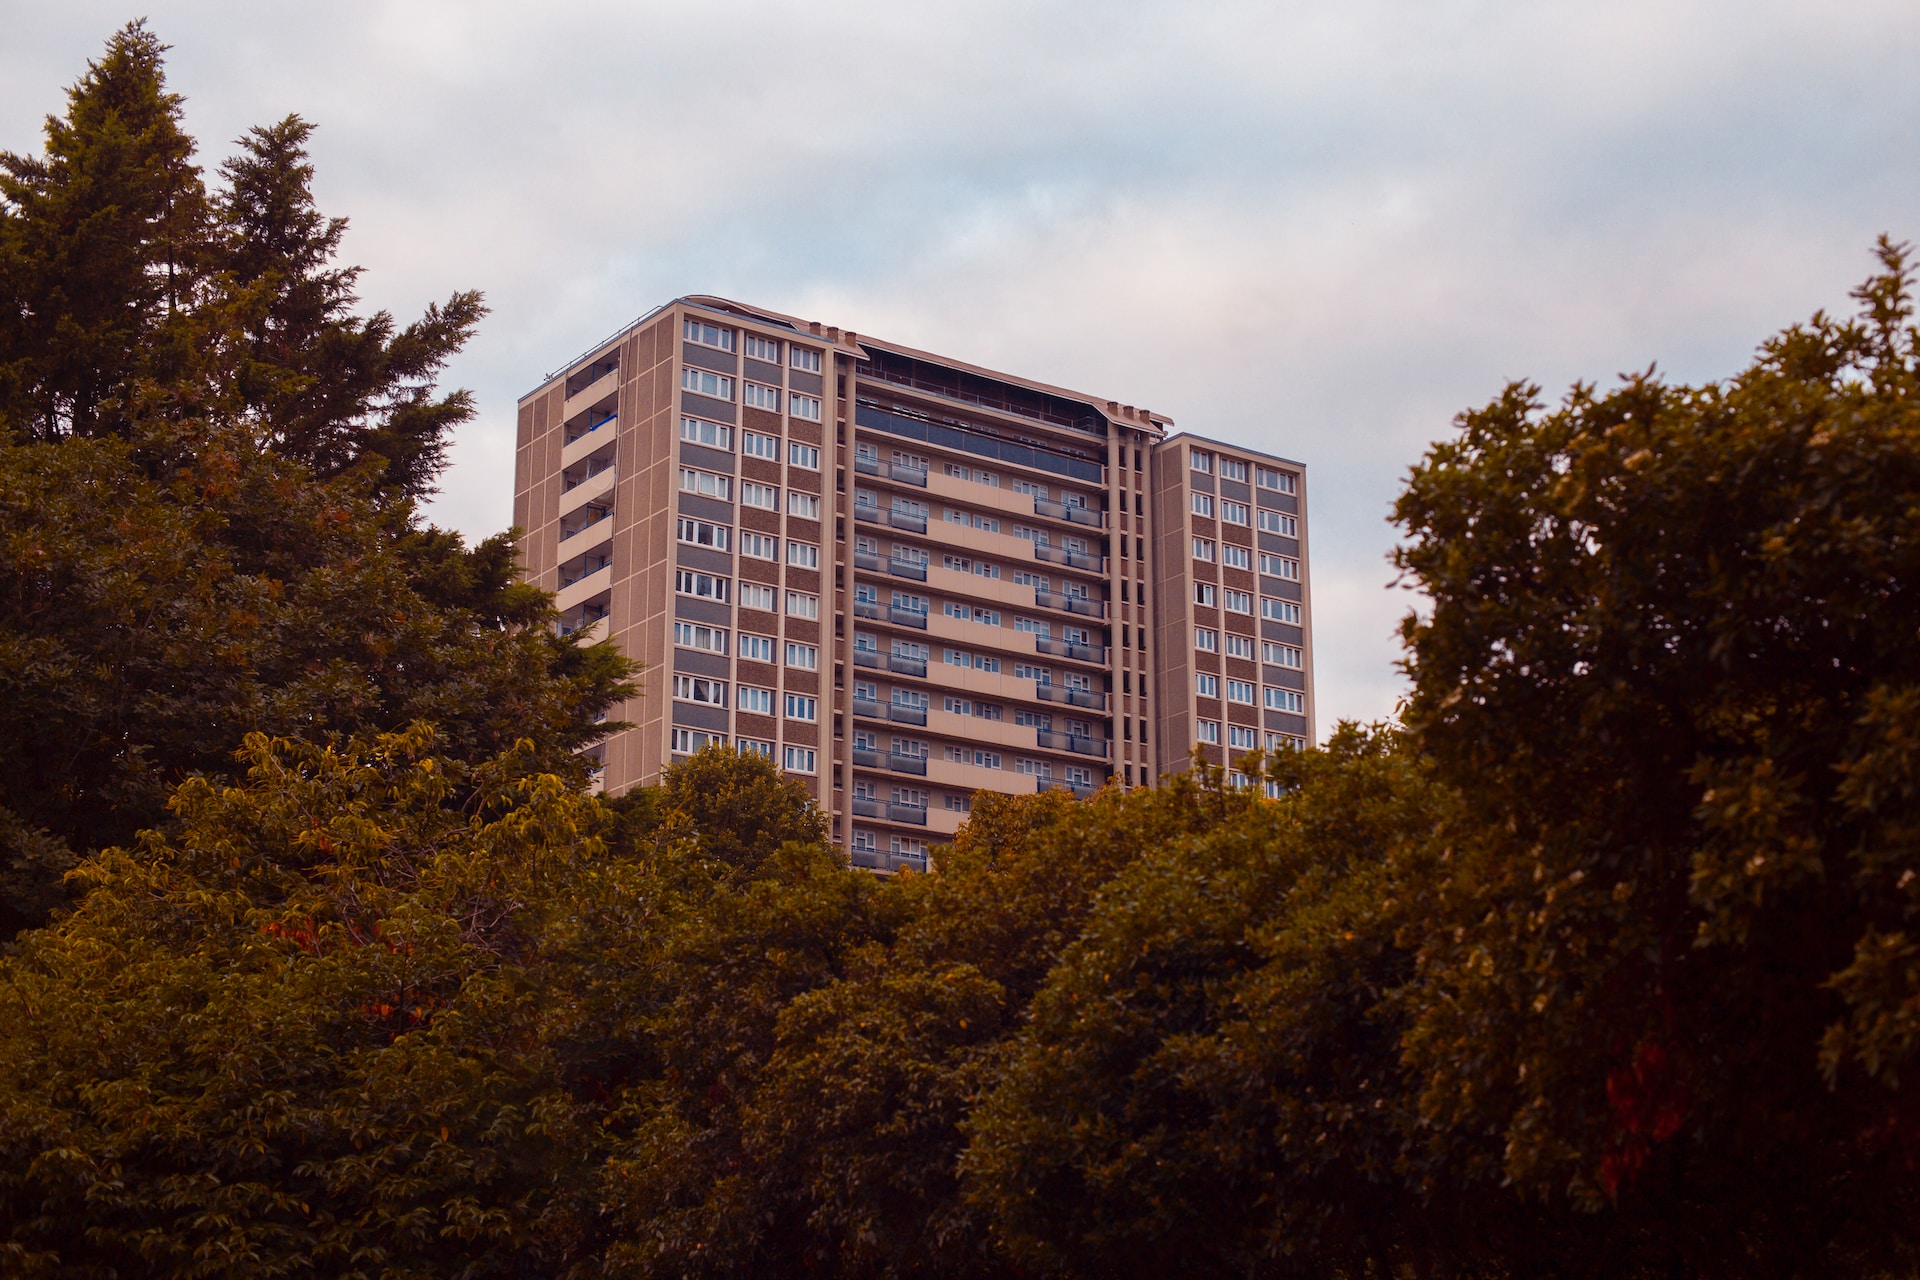 A block of flats in the distance surrounded by trees